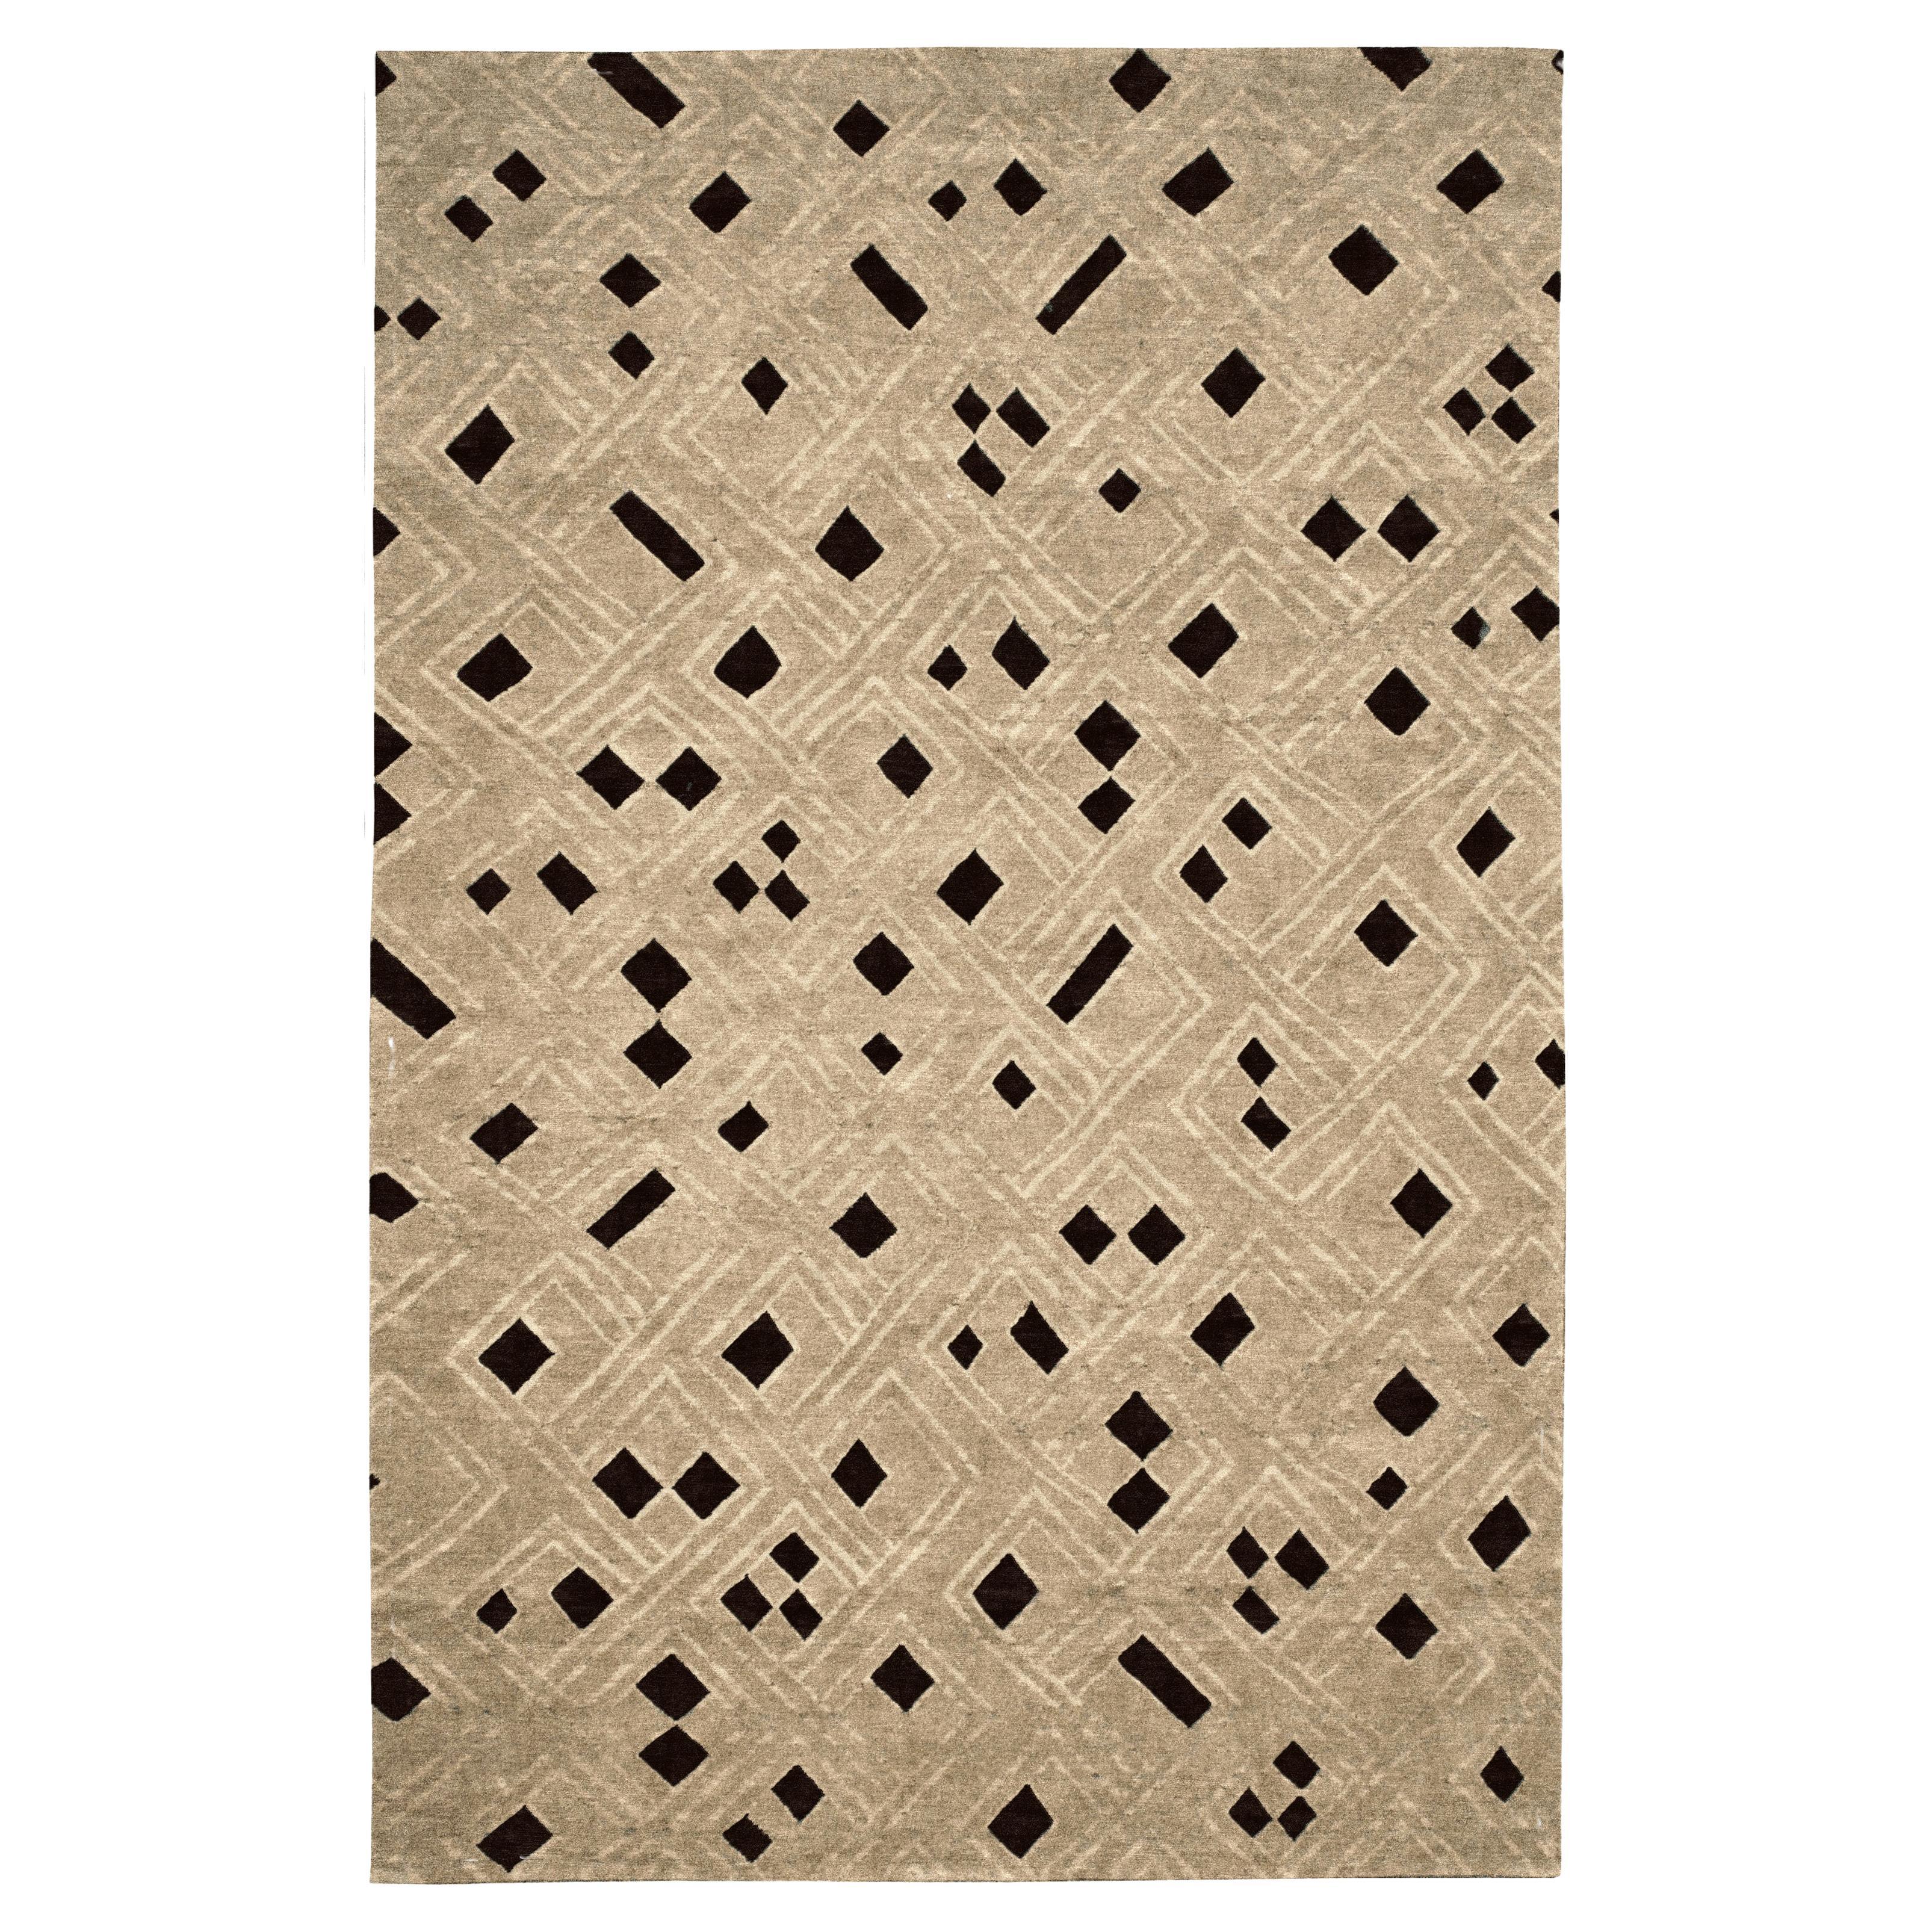 Luxury Modern Hand-Knotted African Kota 12x16 Rug